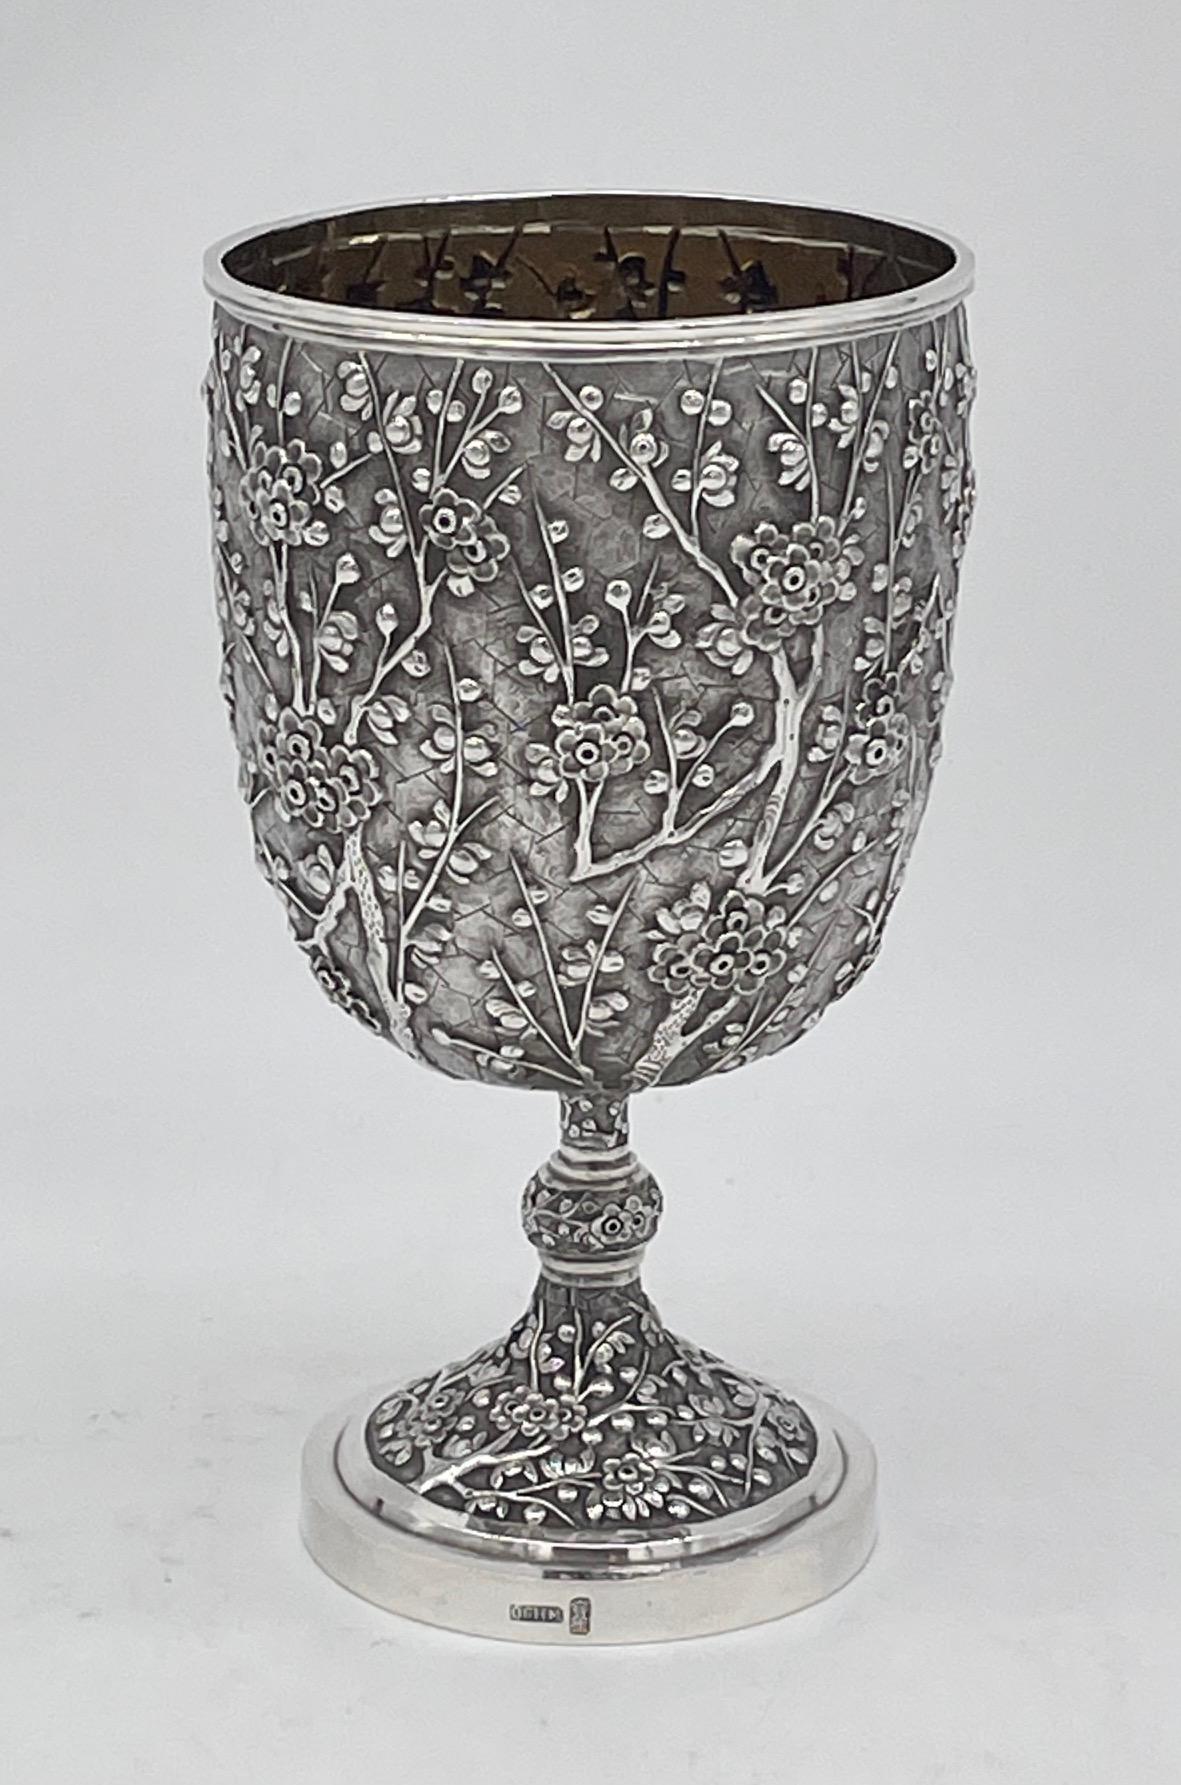 Chinese Export Silver Goblet, with prunus decoration. The goblet weighs 258g and dates from around 1885. Marked WH for Wang Hing '宏兴‘ which was the biggest silver retailer to Westerners in China between the 1860s and 1940s, and the most well known